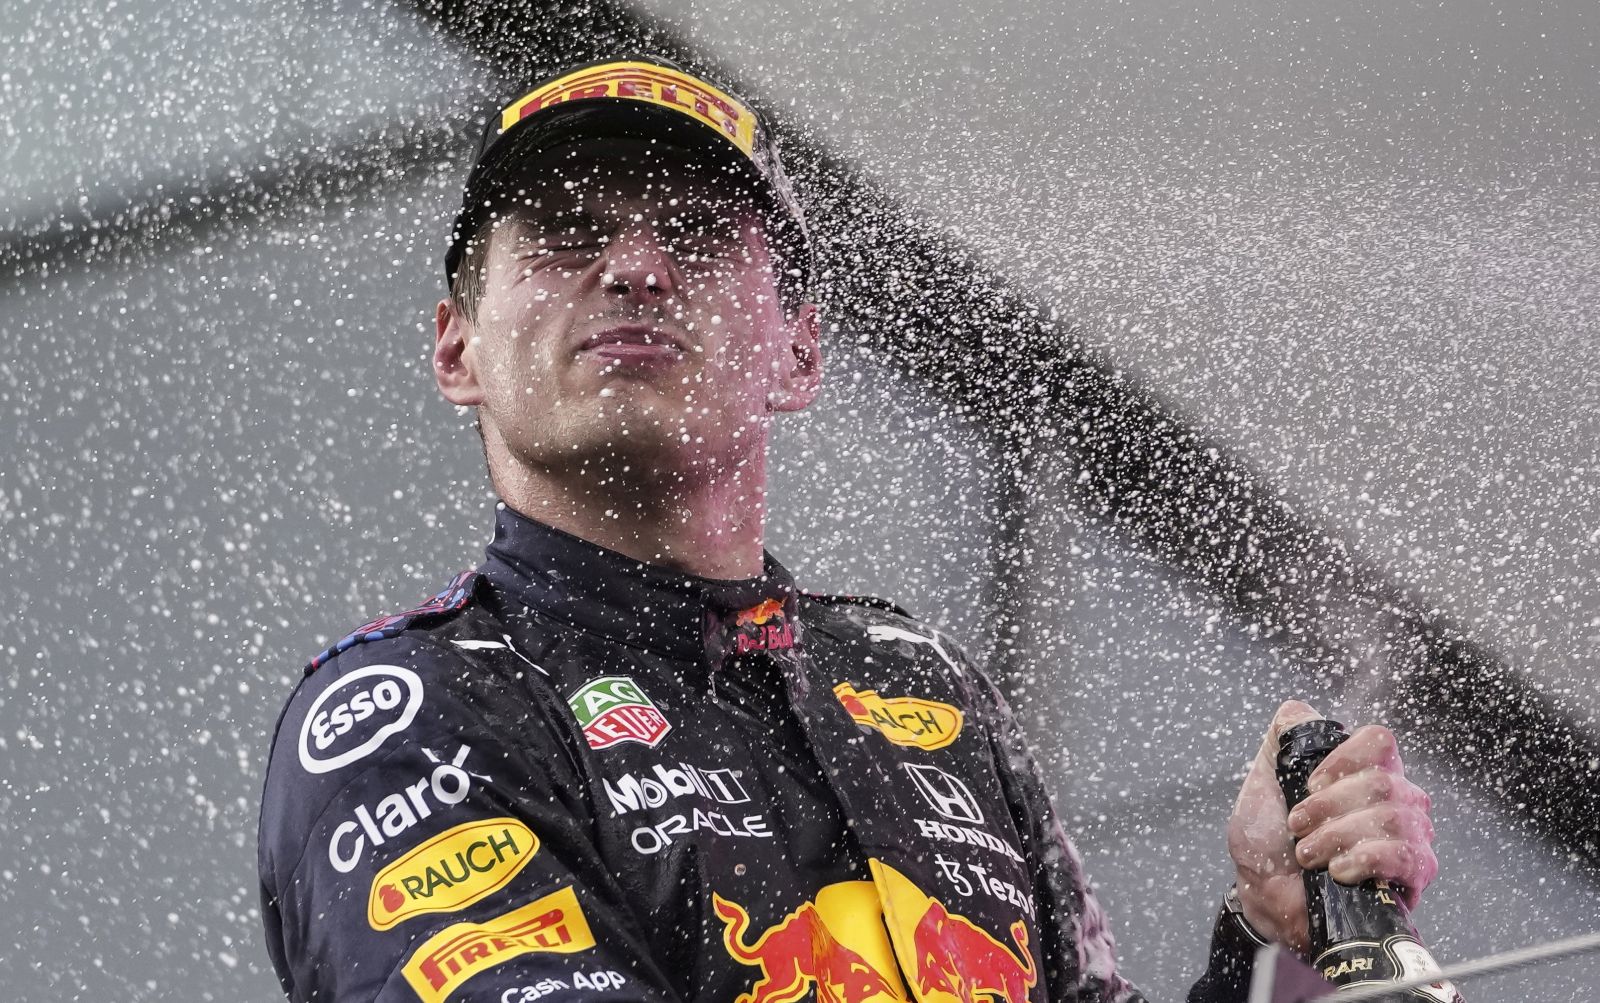 epa09305508 Dutch Formula One driver Max Verstappen of Red Bull Racing celebrates on the podium after winning the Formula One Grand Prix of Styria at the Red Bull Ring in Spielberg, Austria, 27 June 2021.  EPA/Darko Vojinovic / POOL